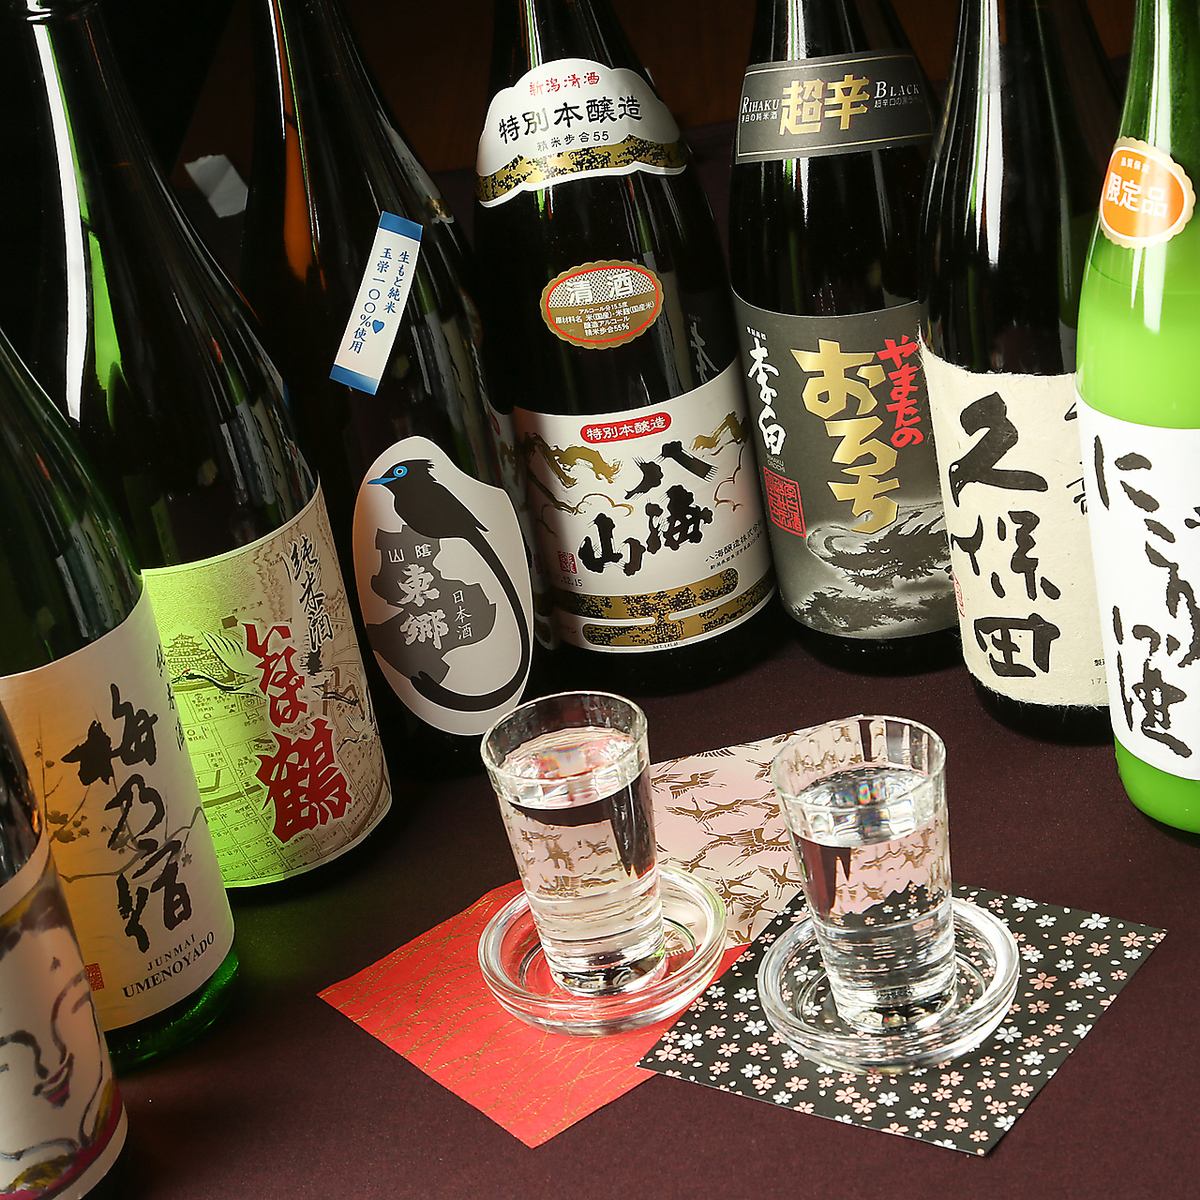 A must-see for Japanese sake lovers! All-you-can-drink of 70 types including 10 types of sake♪ From 1,800 yen